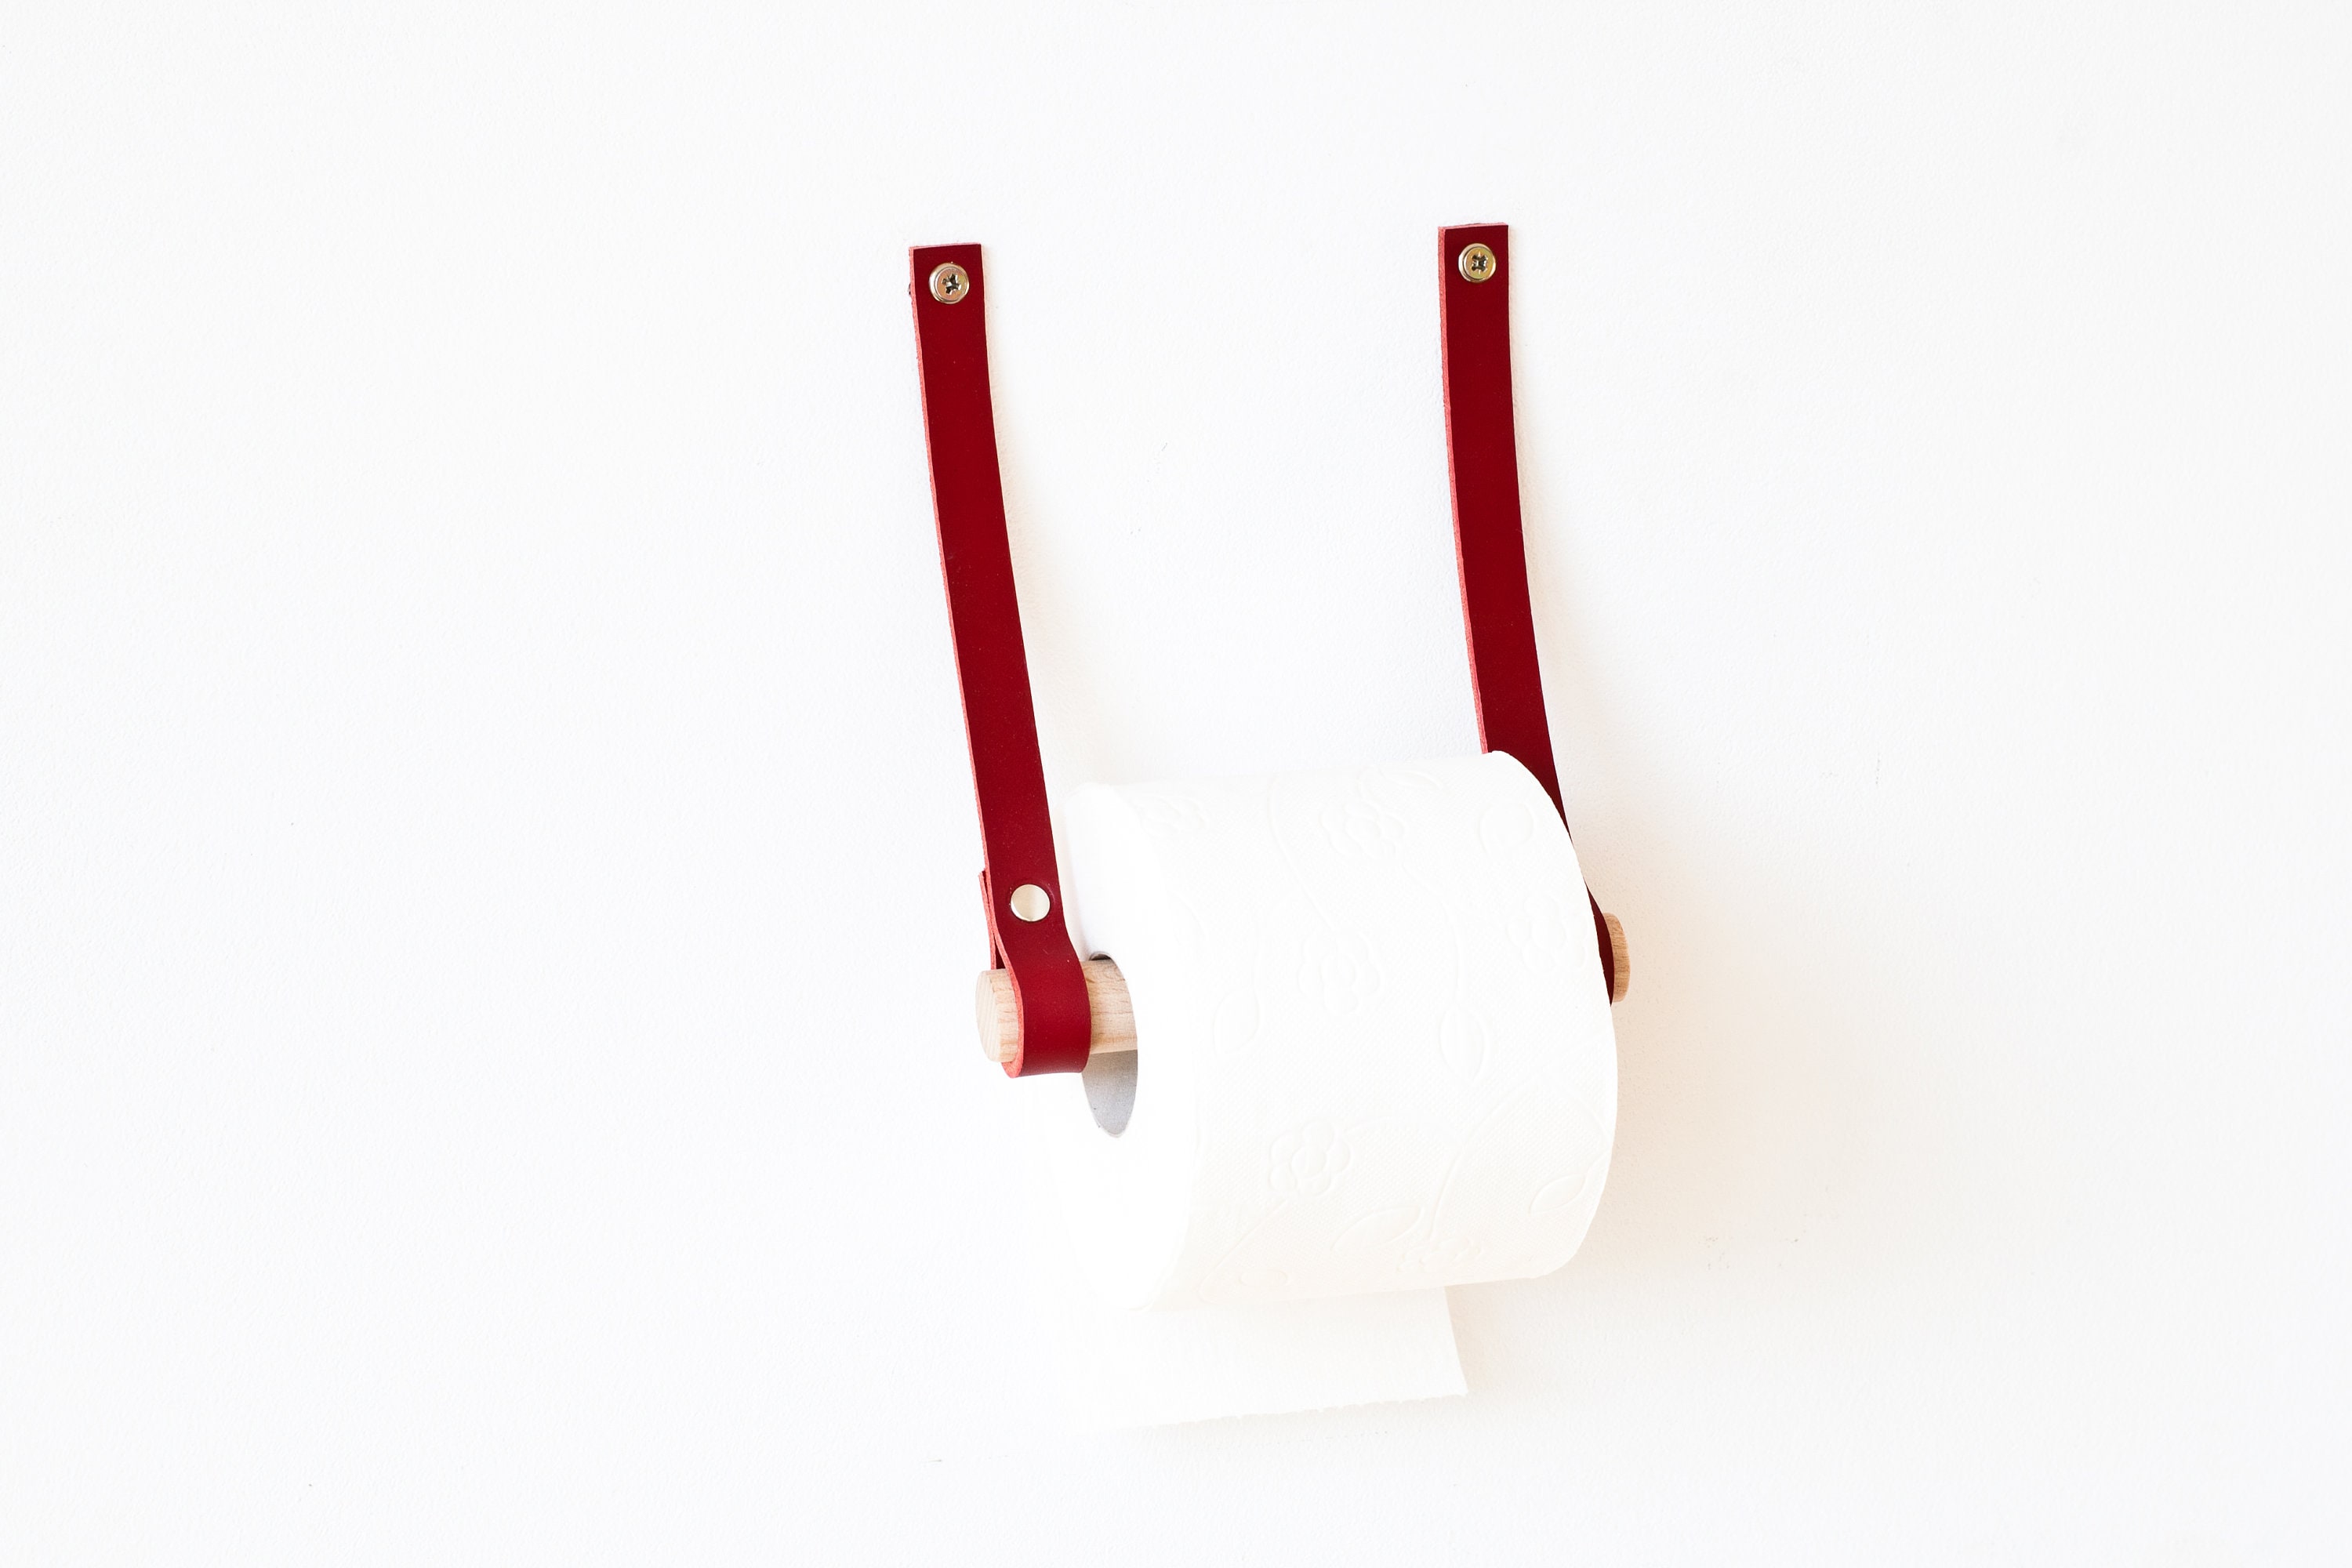 Leather Toilet Roll Holder Leather Toilet Paper Holder Loo 